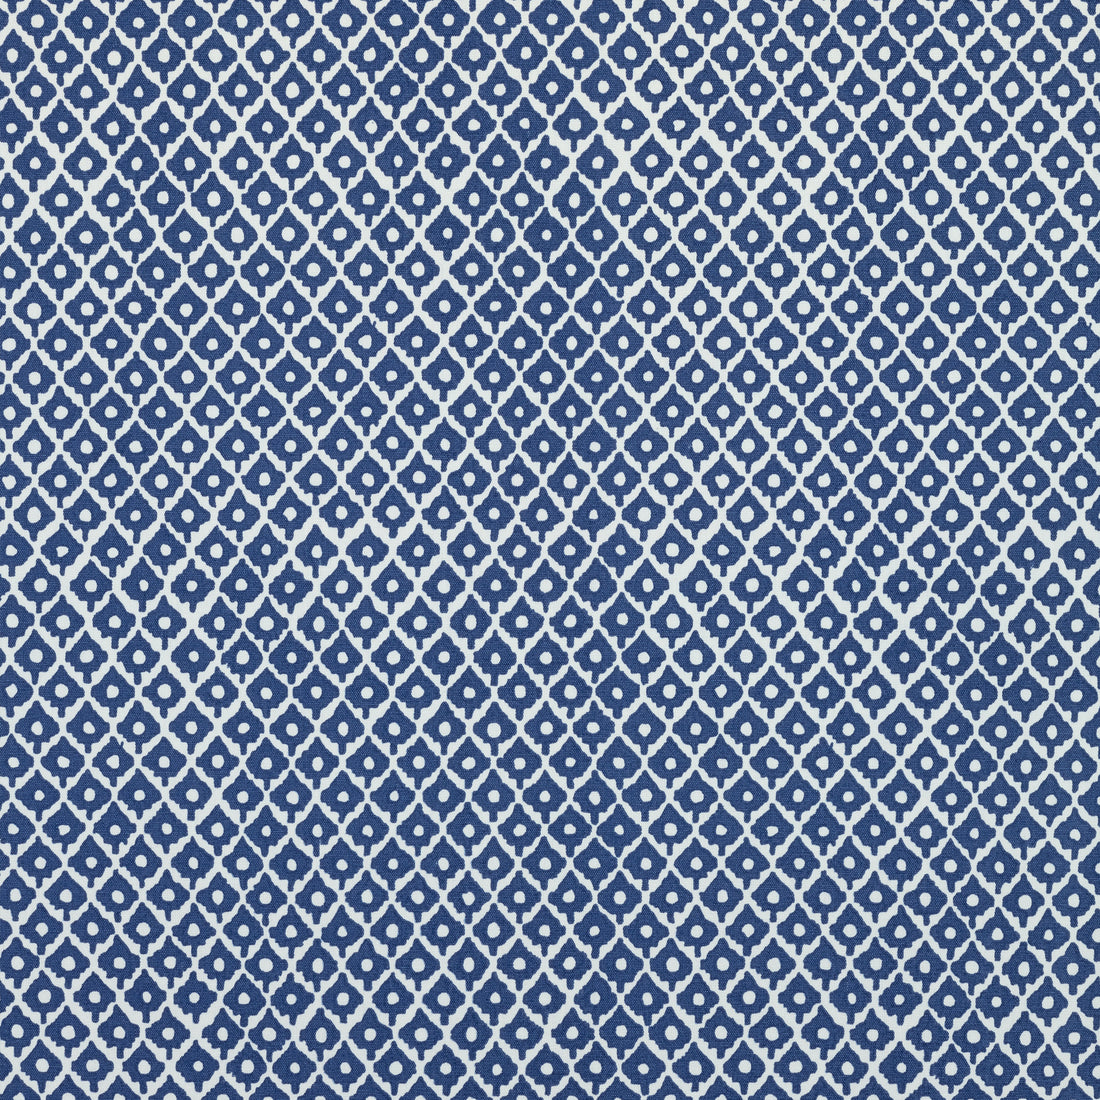 Petit Arbre fabric in navy on white  color - pattern number AF9630 - by Anna French in the Savoy collection